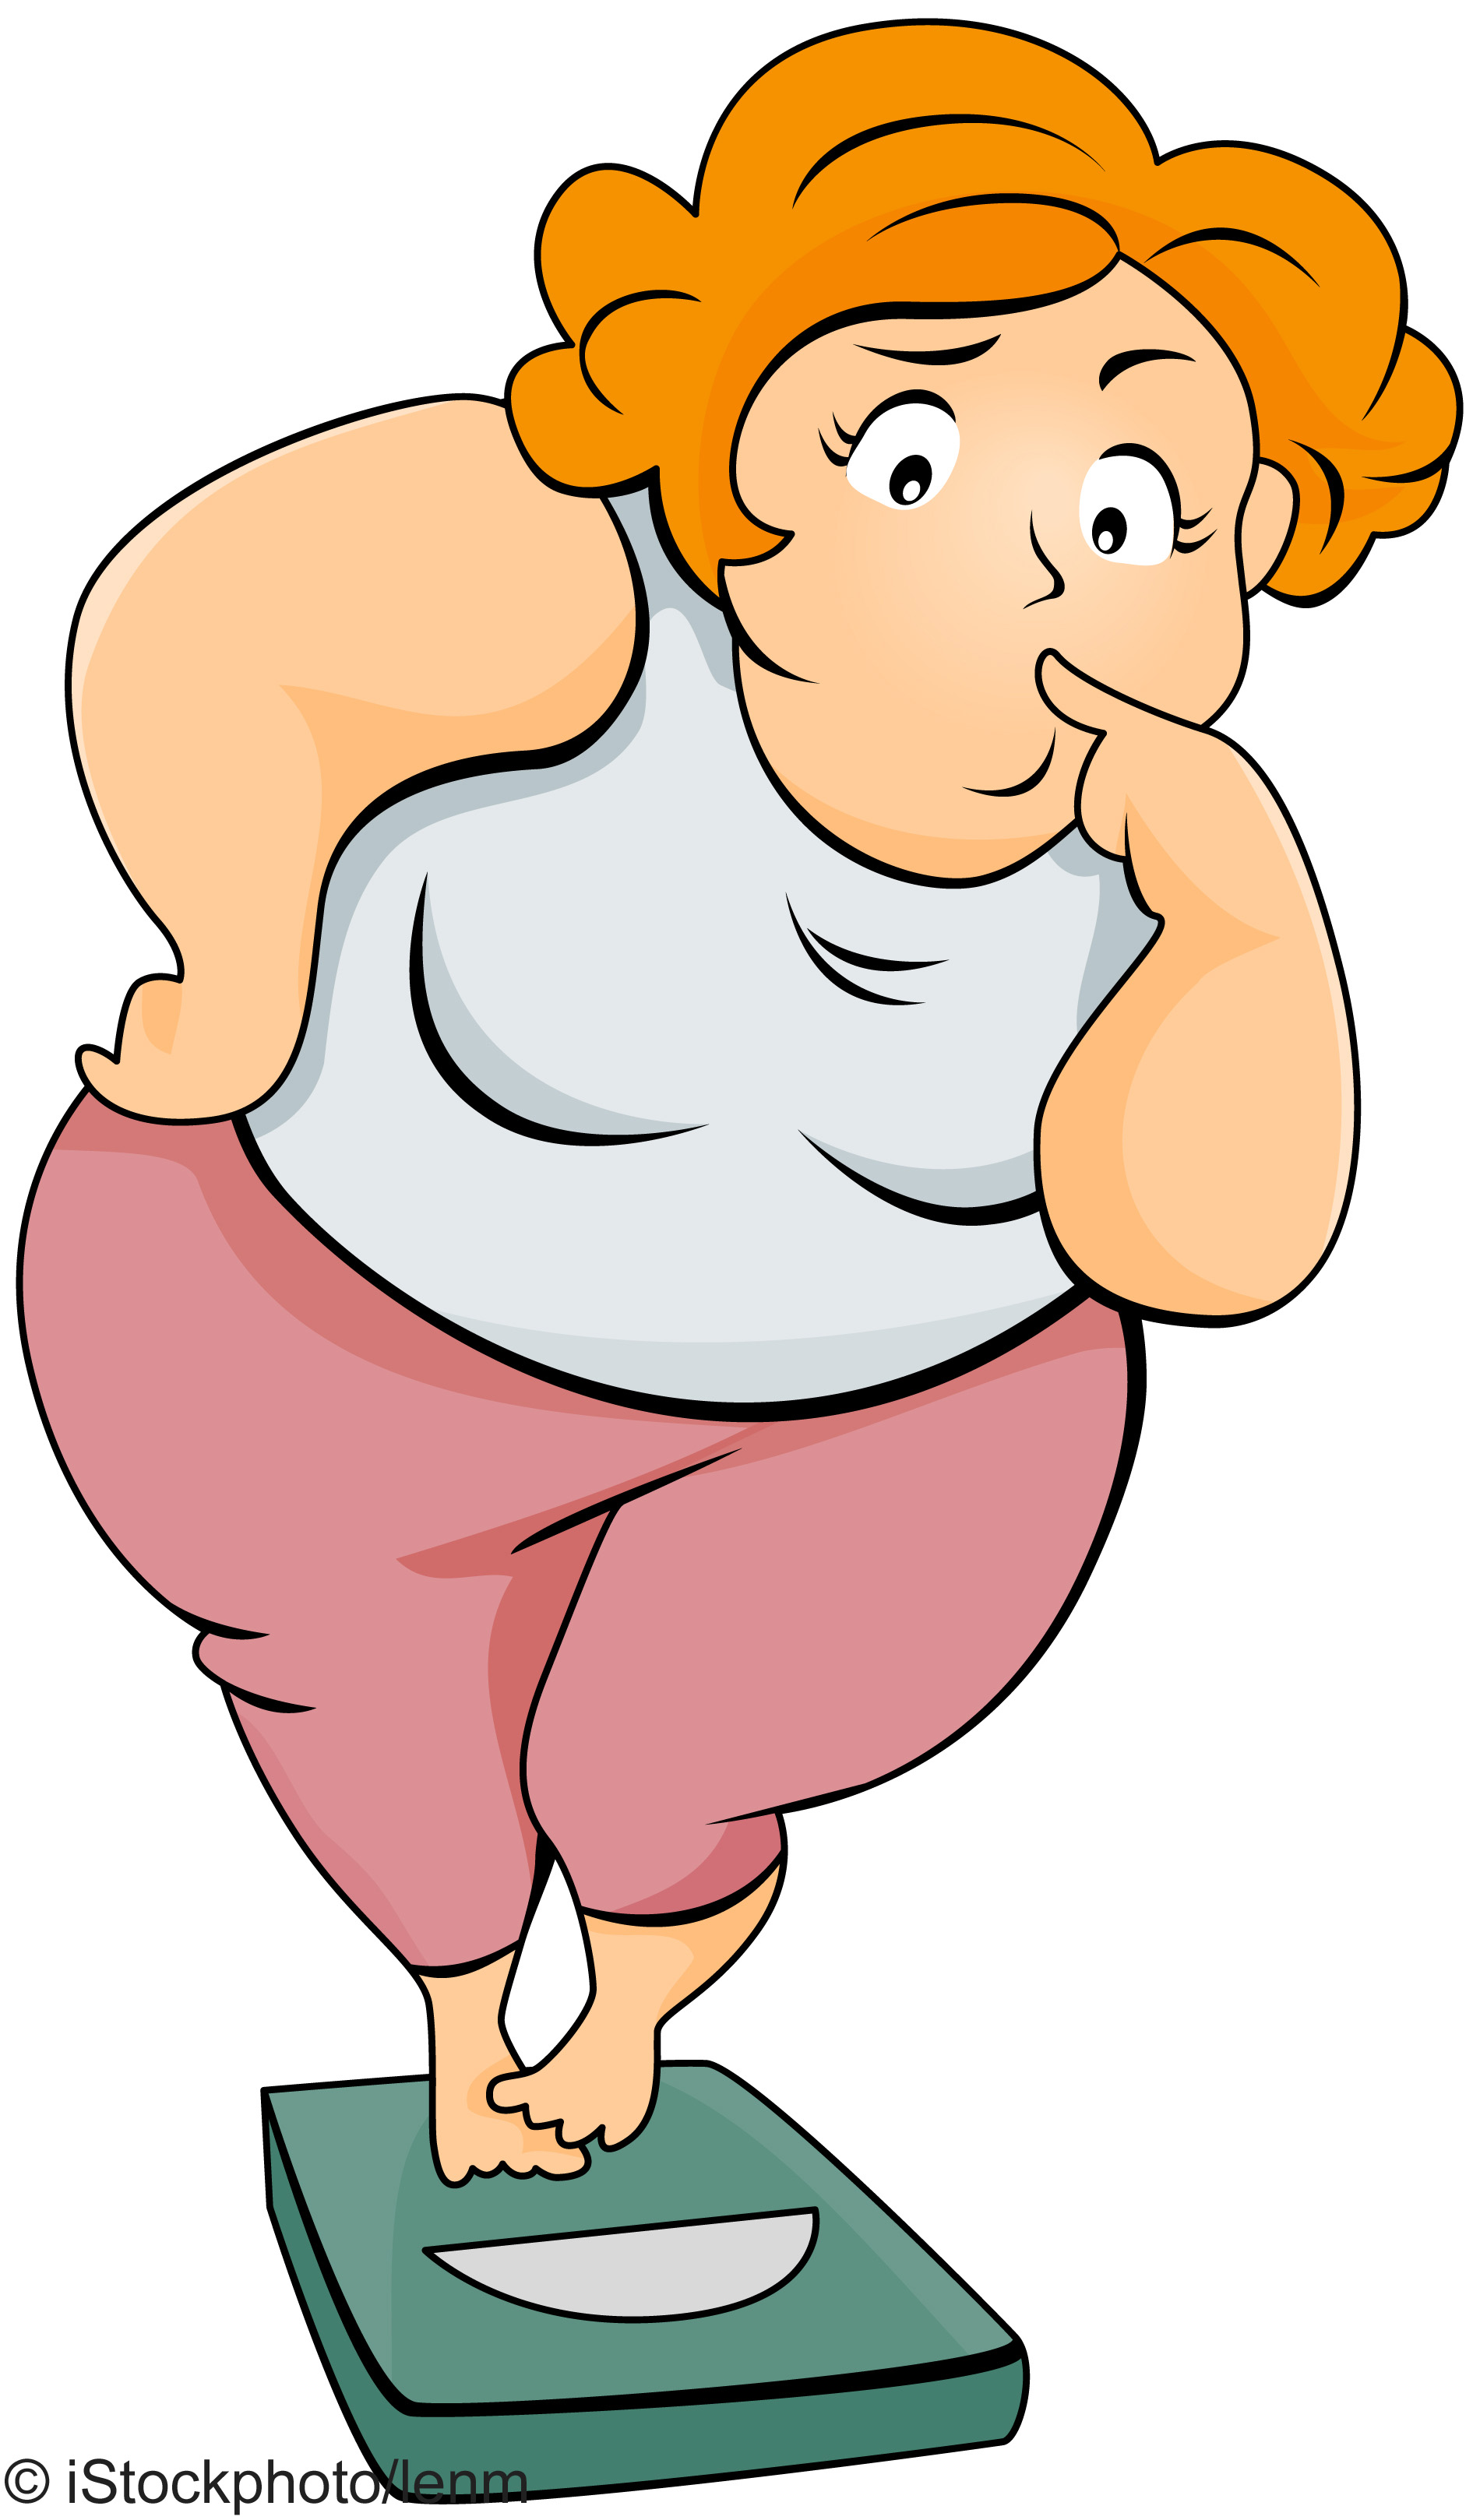 free clipart images weight loss - photo #12